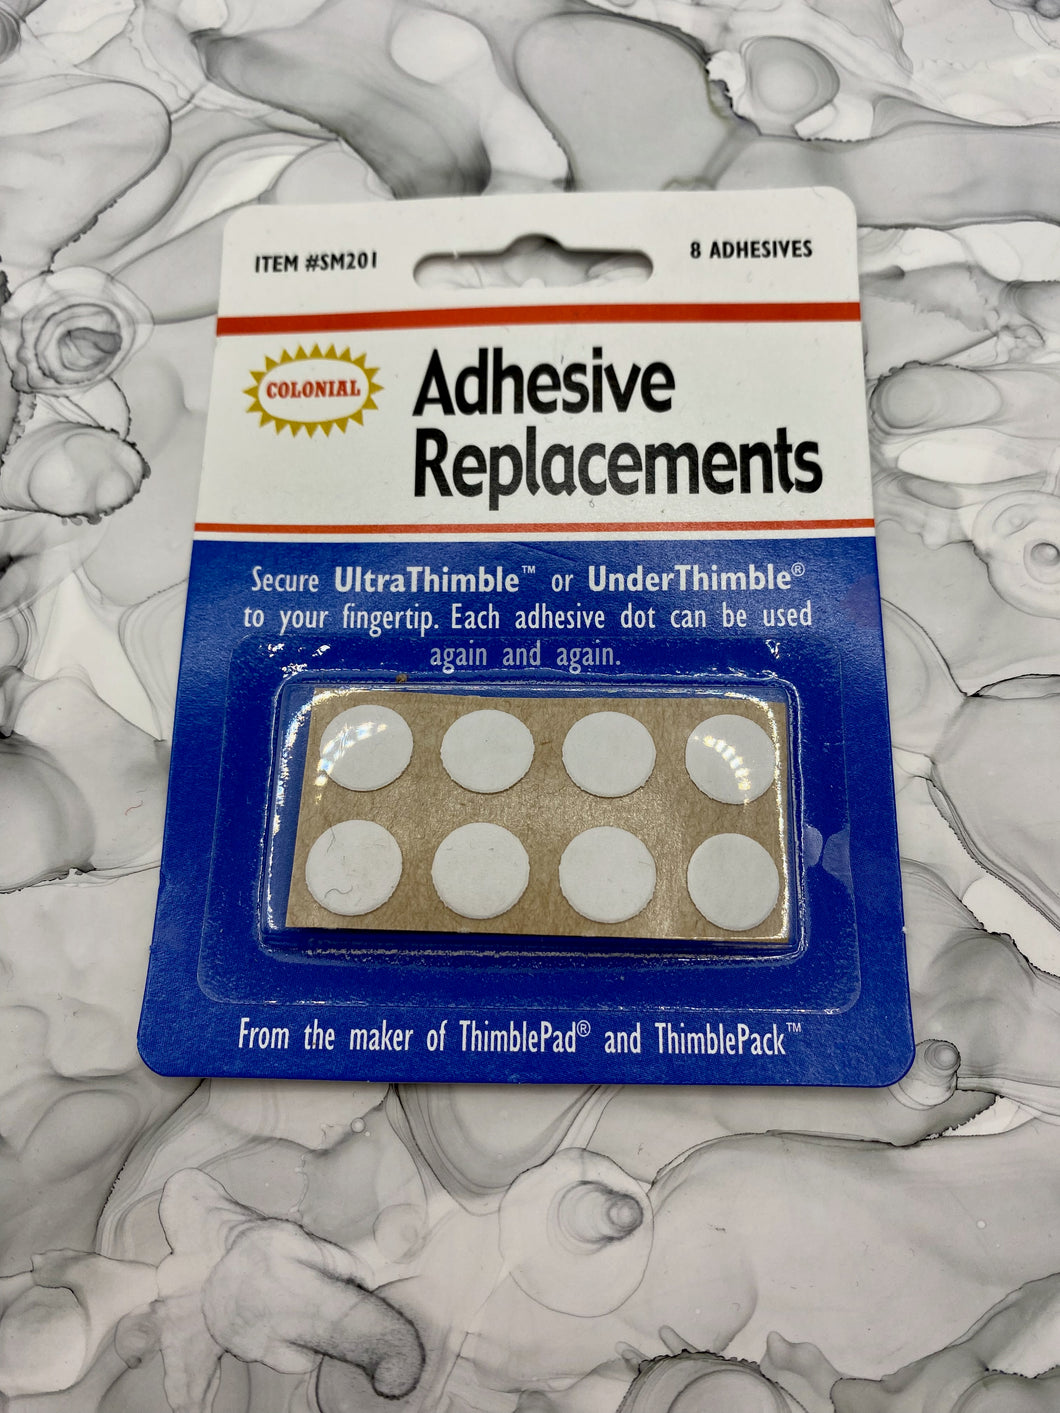 Replacement Adhesives for the UltraThimble or UnderThimble by Colonial